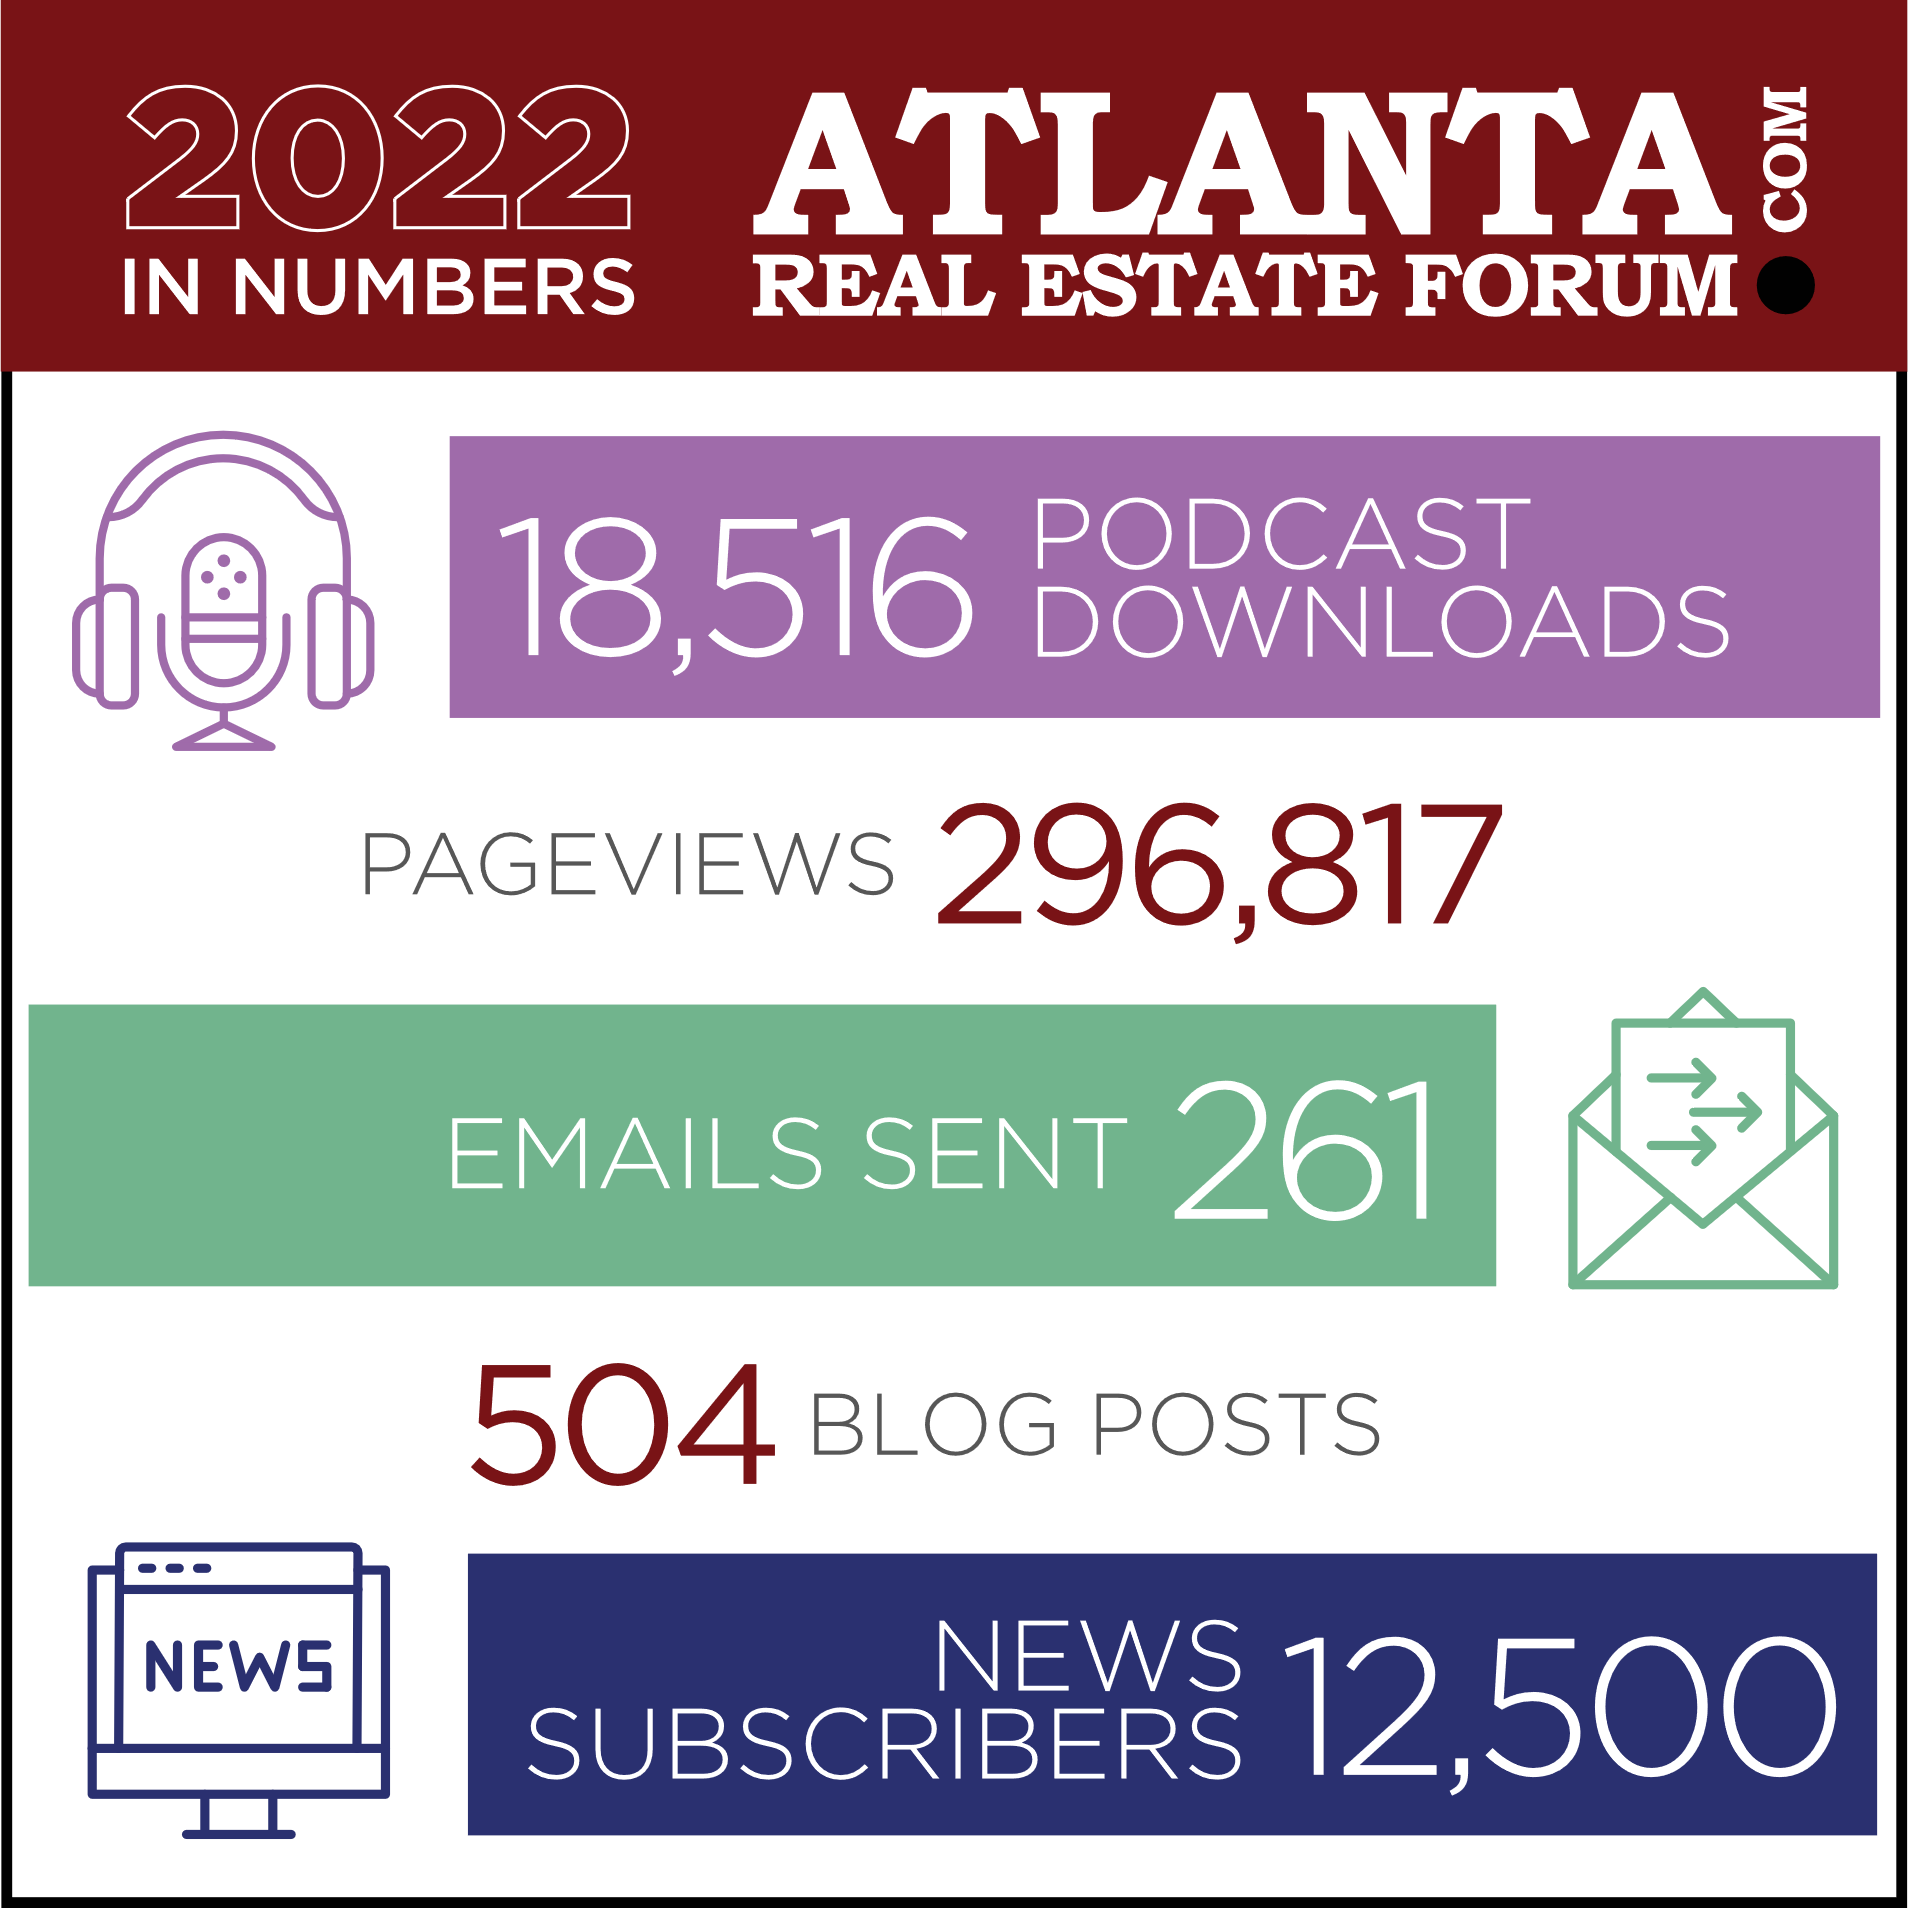 Atlanta Real Estate Forum 2022 by the numbers